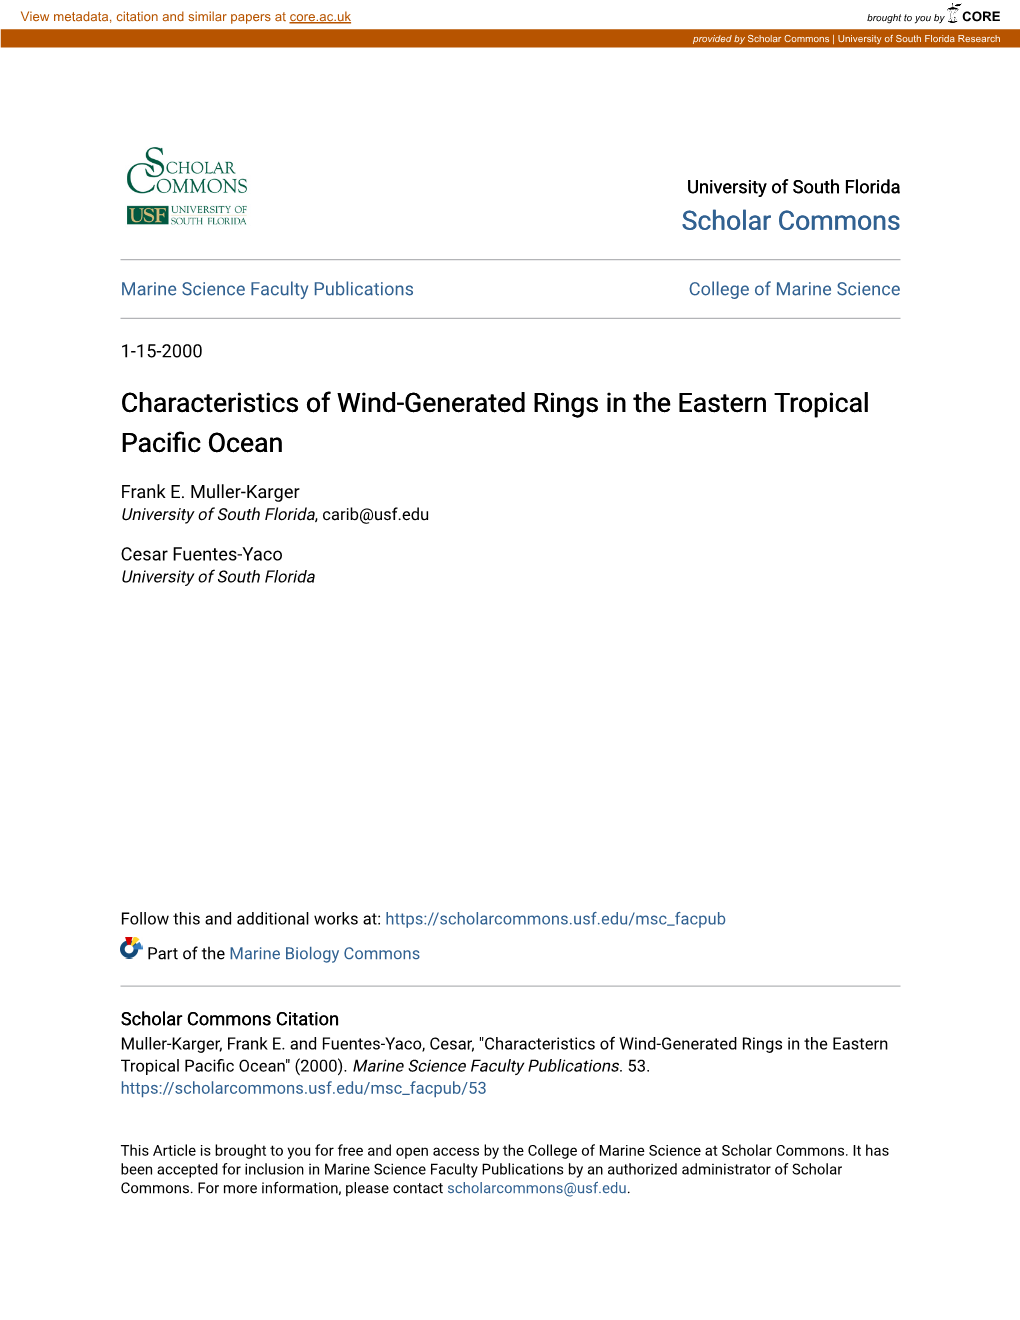 Characteristics of Wind-Generated Rings in the Eastern Tropical Pacific Ocean